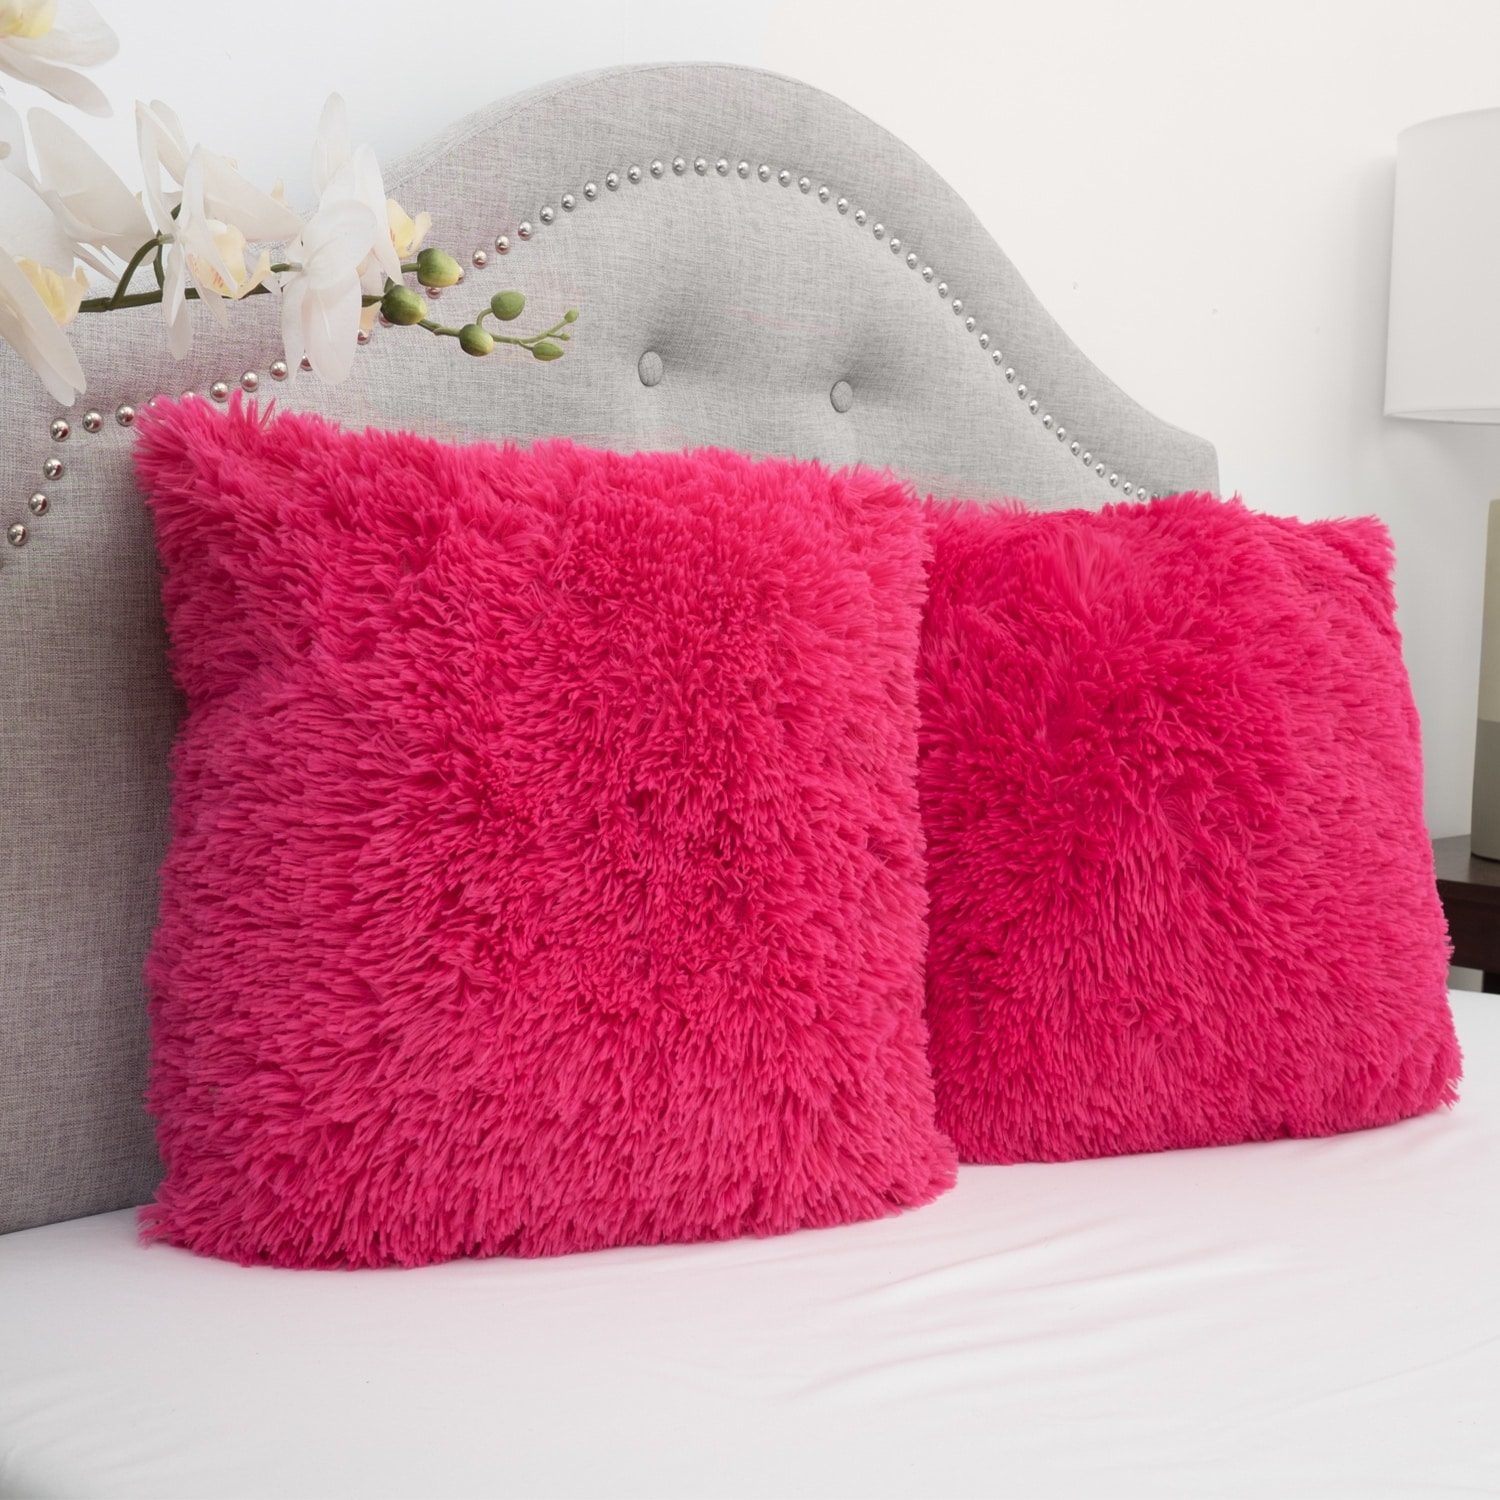 Faux Fur Decorative 18-inch Throw Pillows (Set of 2) - On Sale